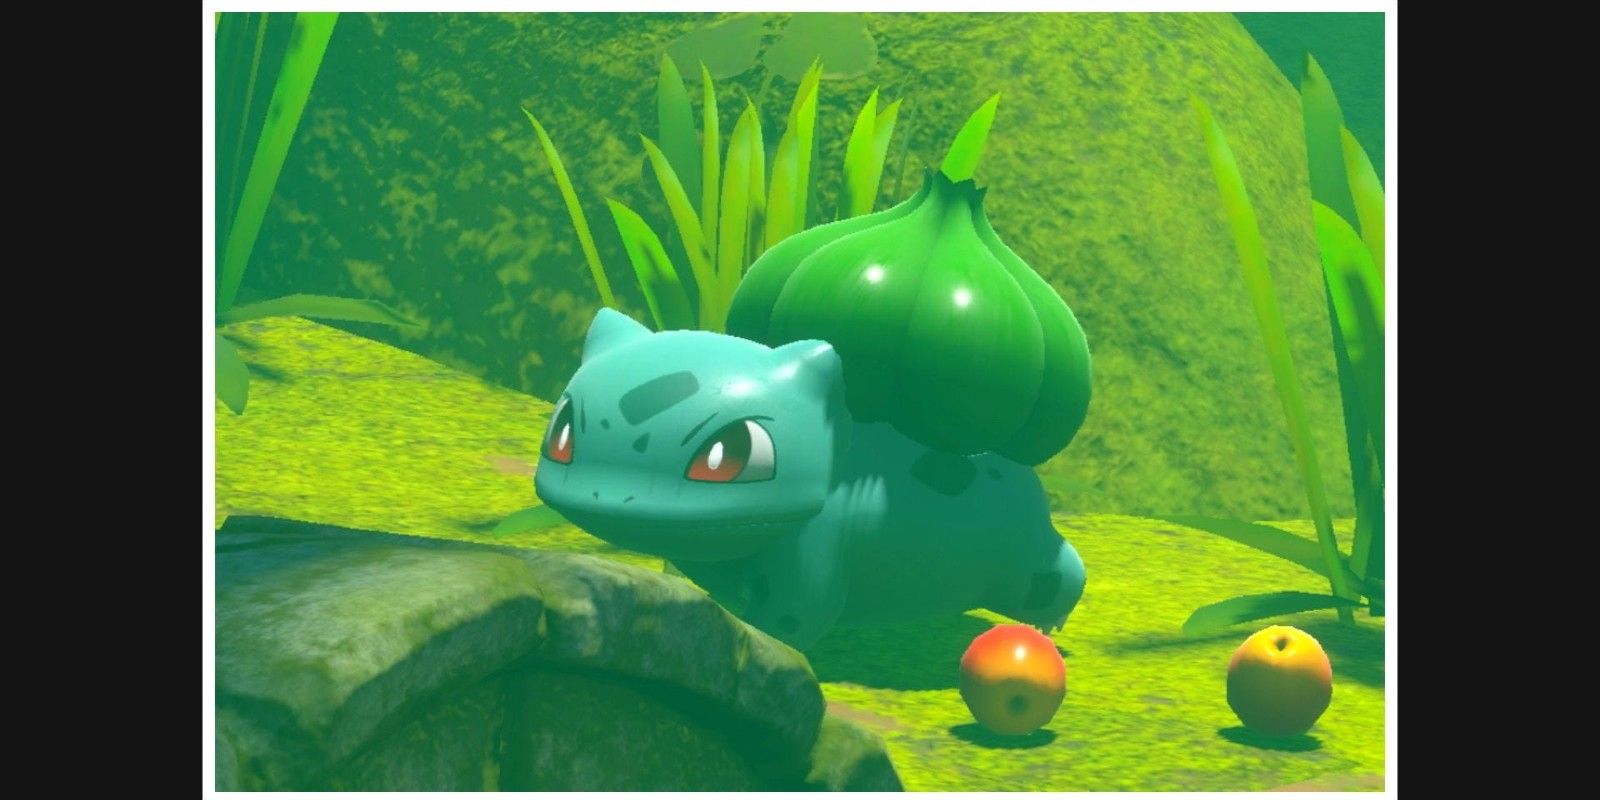 A player takes a photo of Bulbasaur in New Pokémon Snap